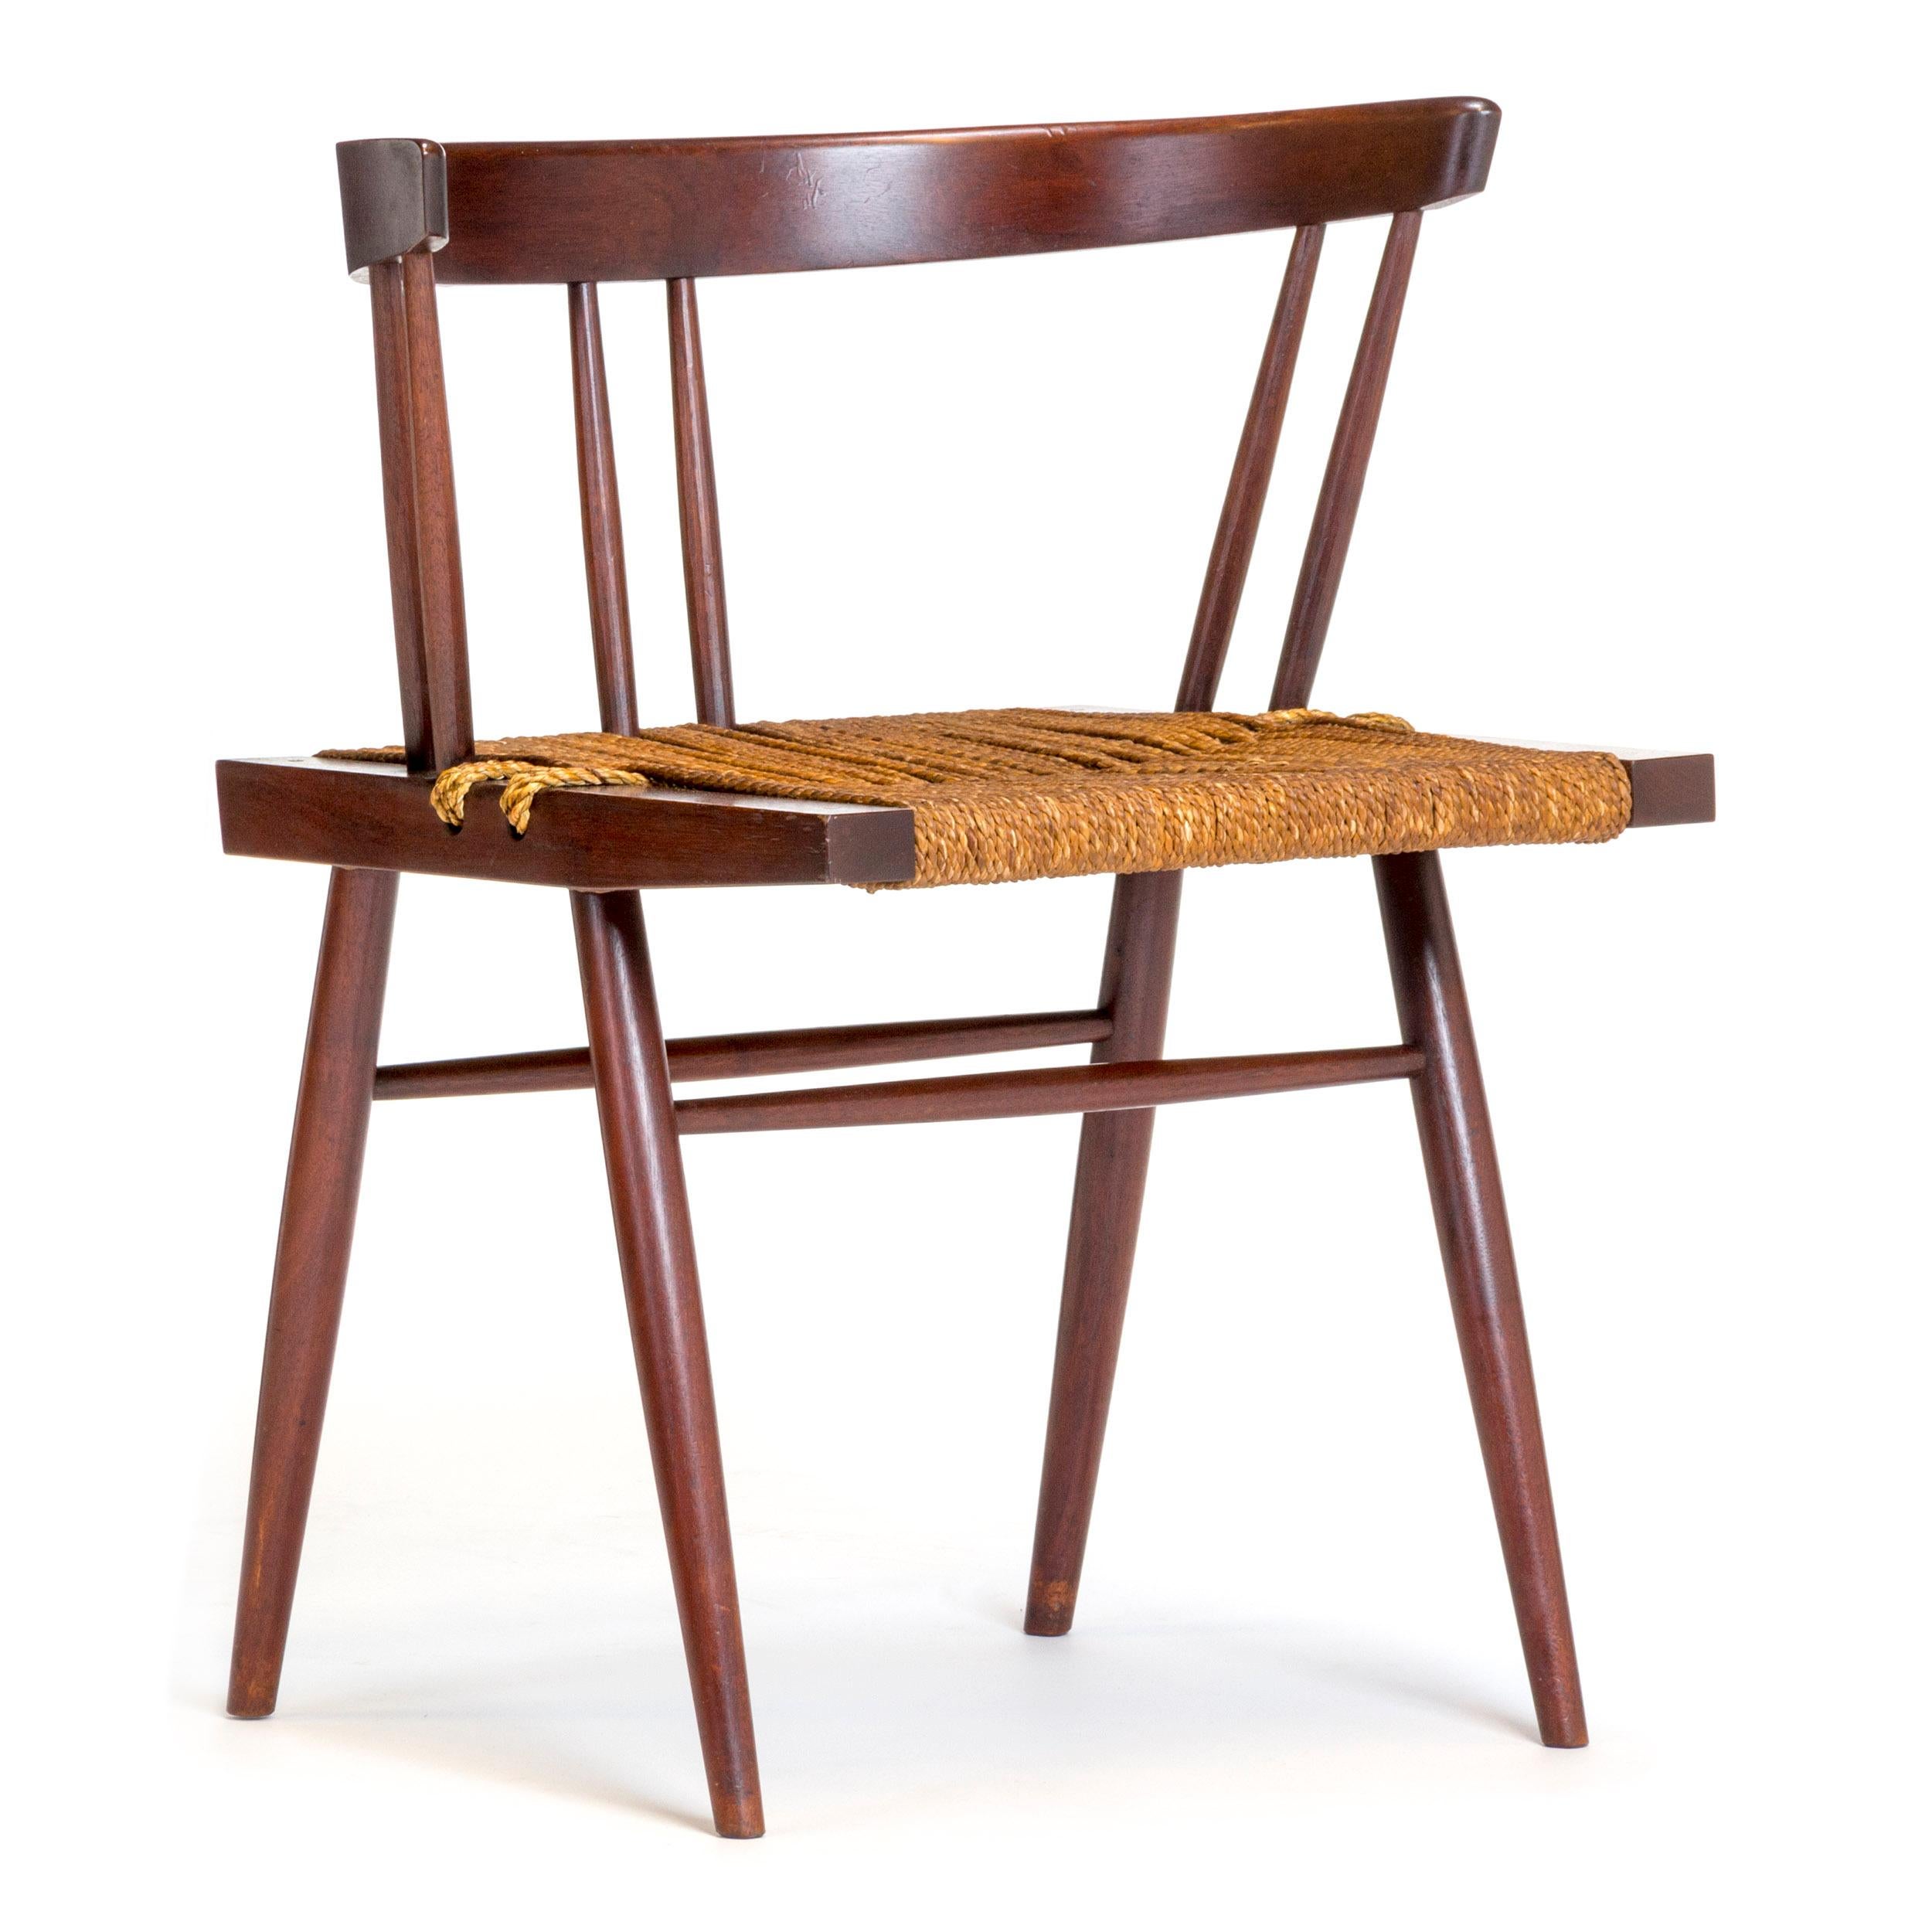 A walnut dining chair or side chair by leading American Craftman designer George Nakashima. Crafted by the George Nakashima Studio from solid walnut wood with a grass cord seat. Made in the USA. 

Also available in a lighter wood finish.